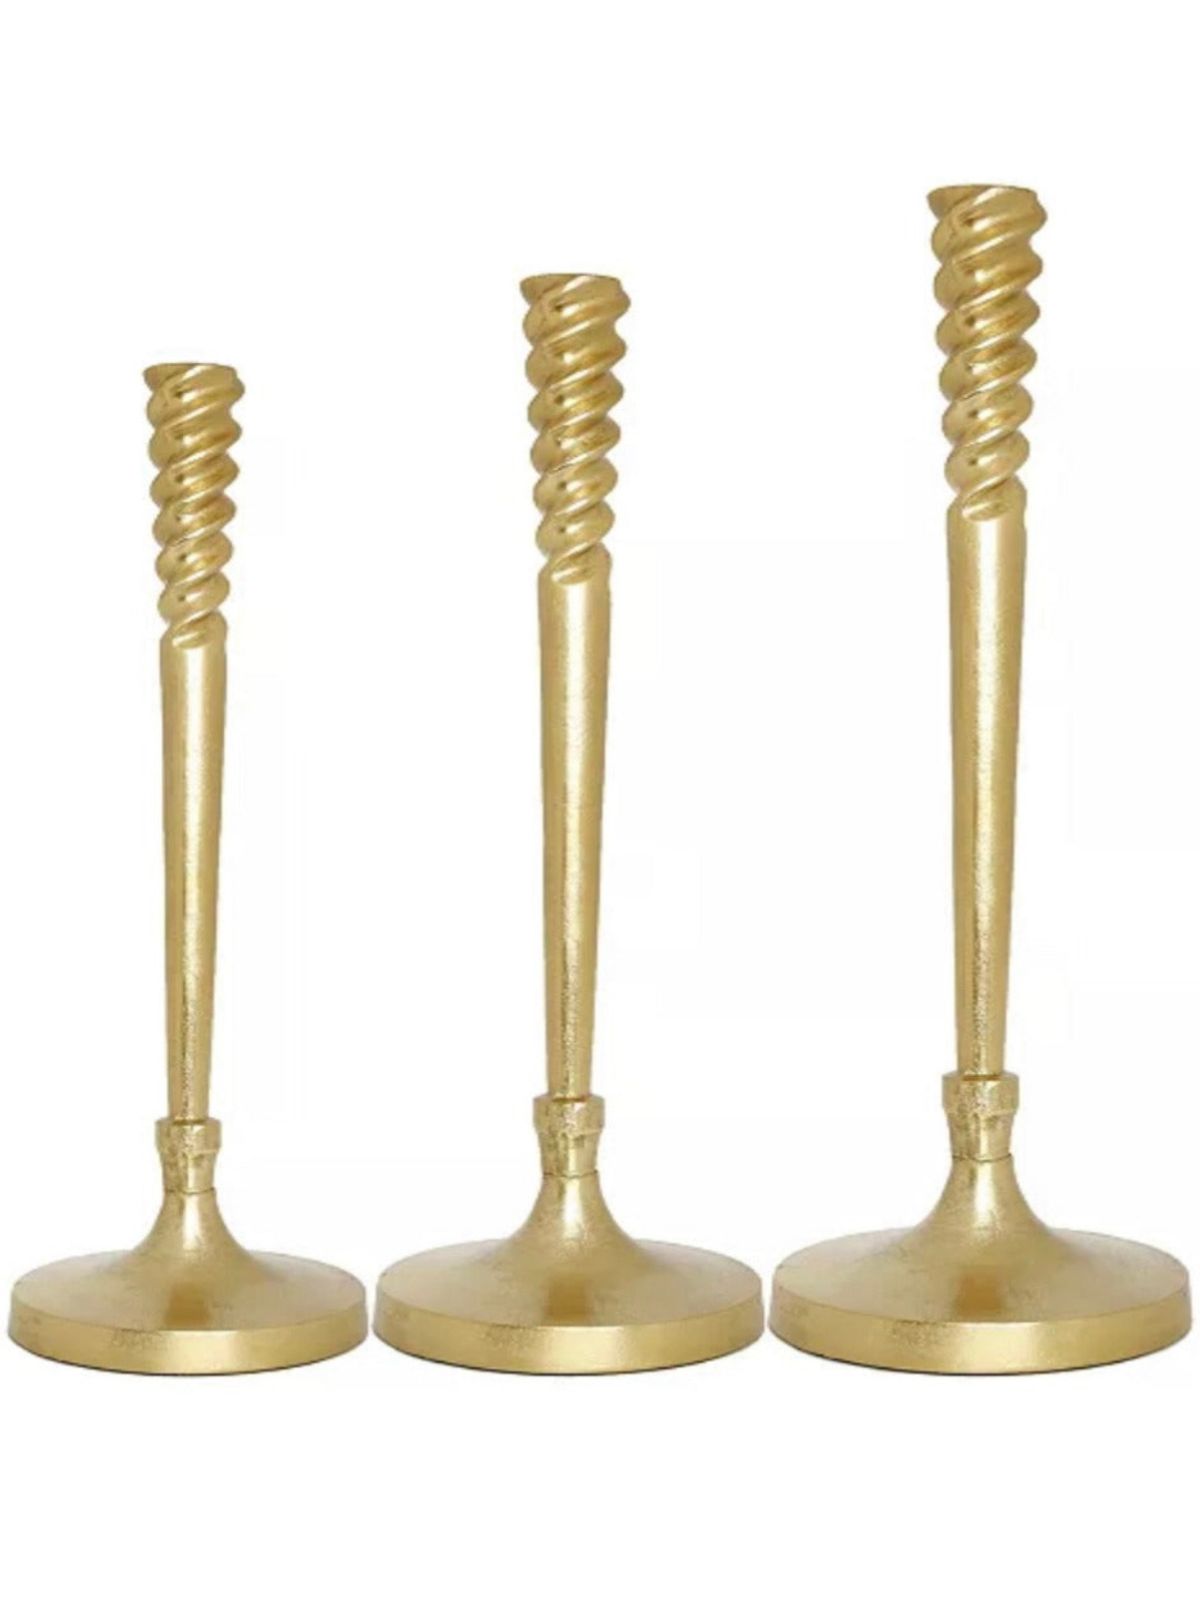 These Gold Stainless Steel Candlestick Holders Have A Spiral Design On Top. Available in 3 Sizes. 